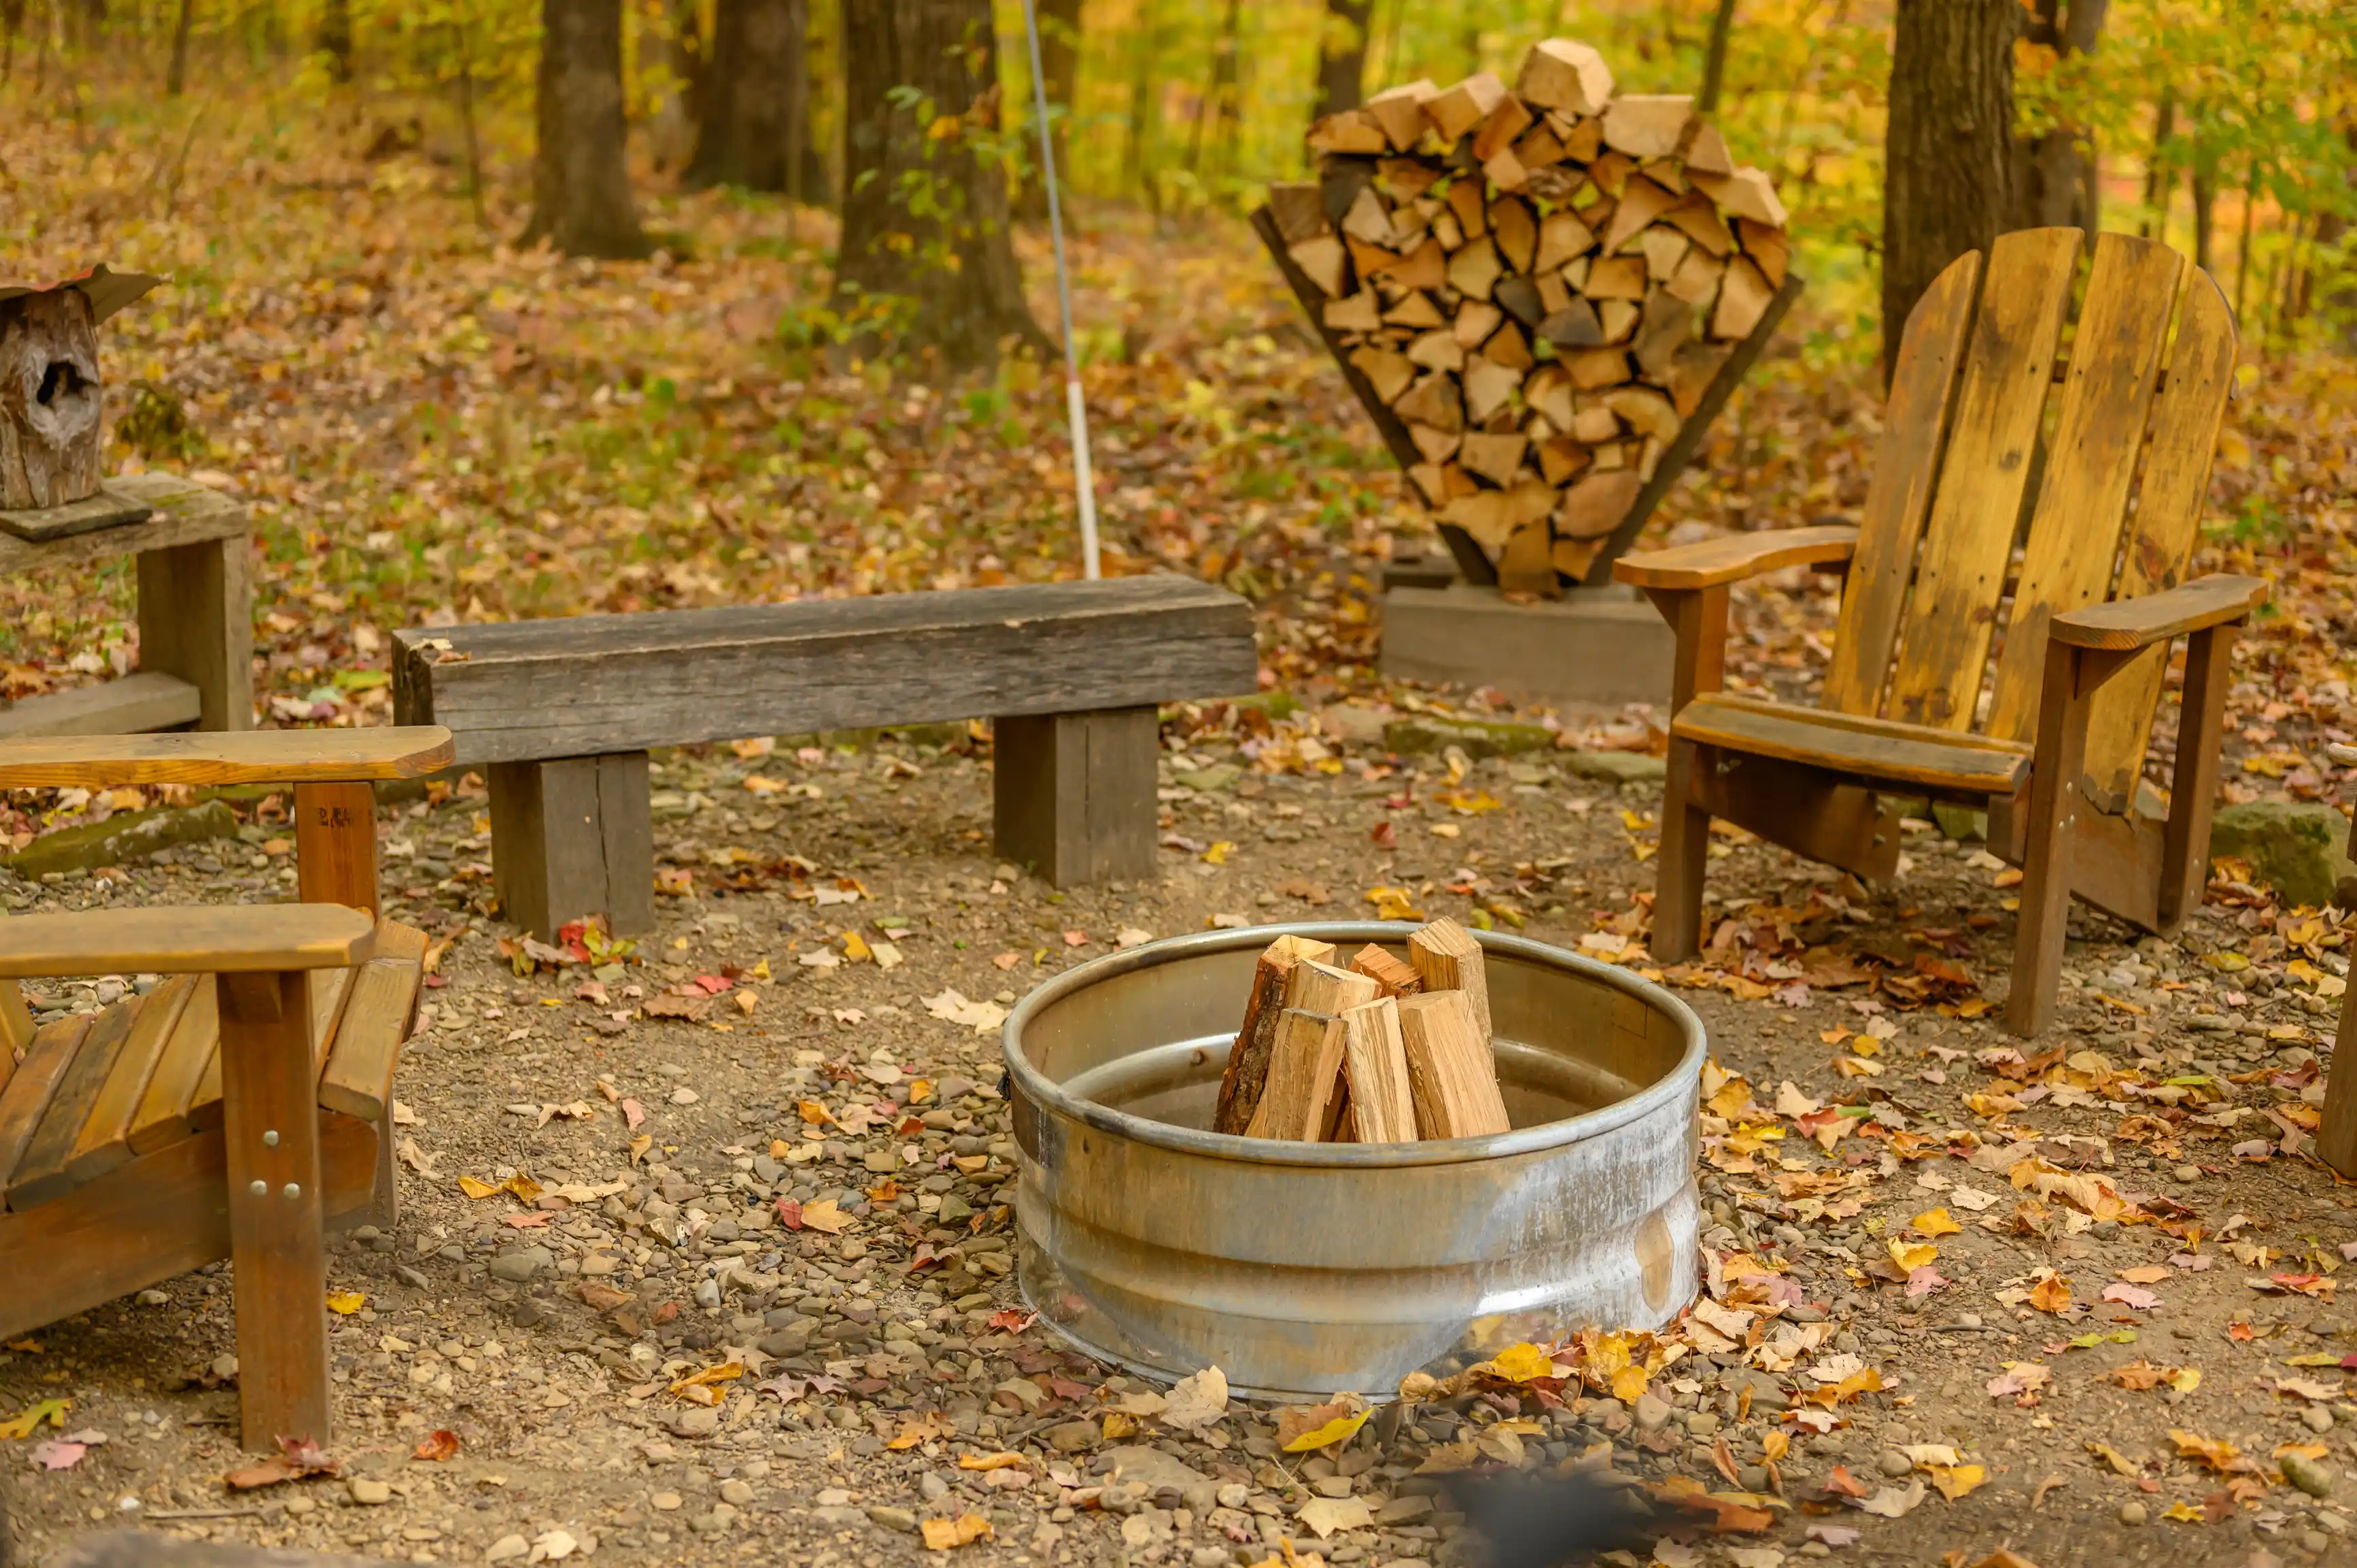 Outdoor fire pit with chopped firewood, surrounded by wooden benches and chairs, with autumn leaves scattered on the ground.